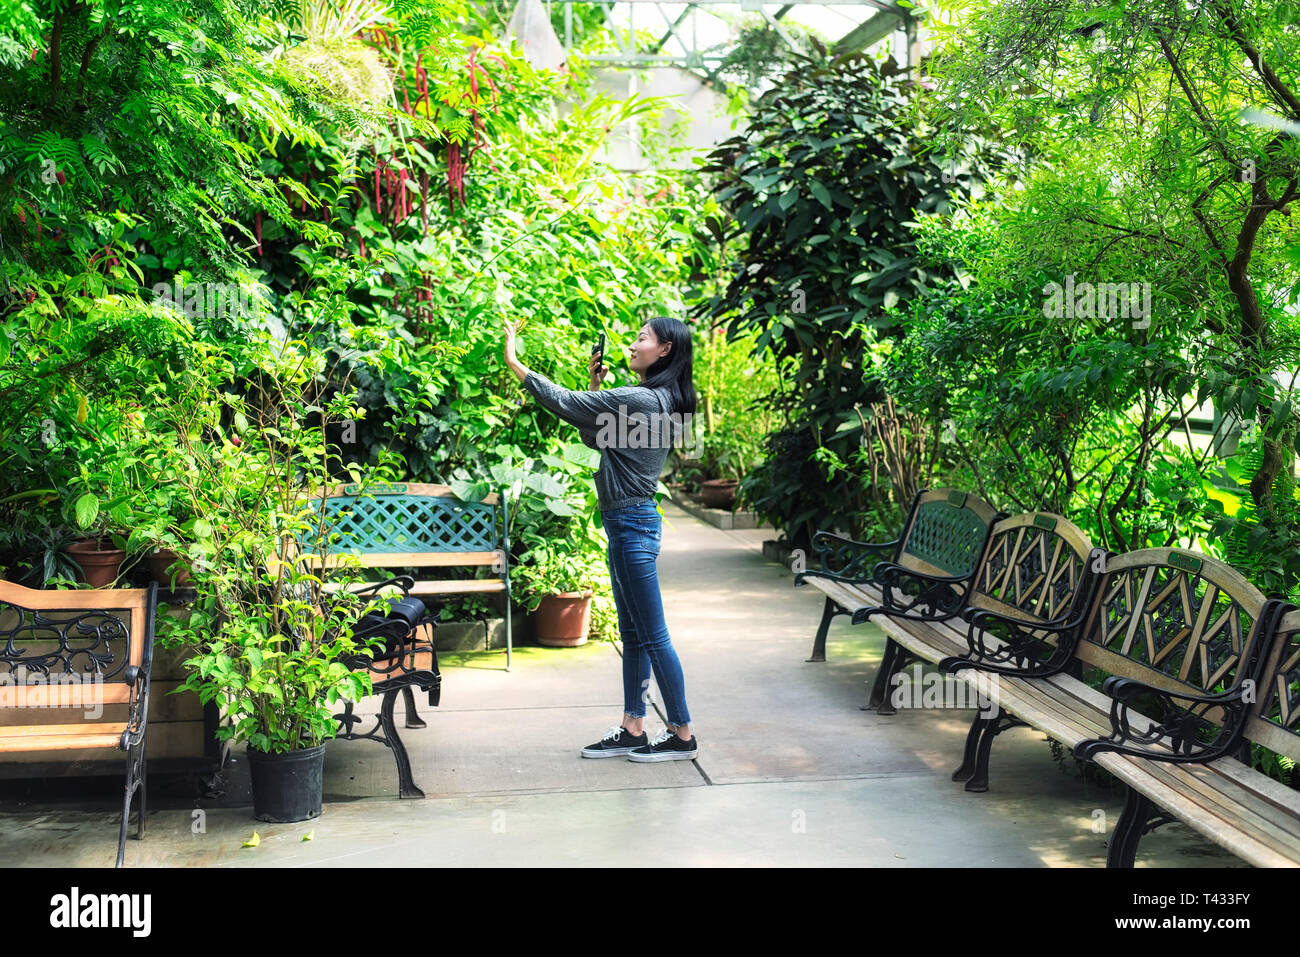 A Chinese Woman Taking Pictures Inside Of A Tropical Greenhouse In